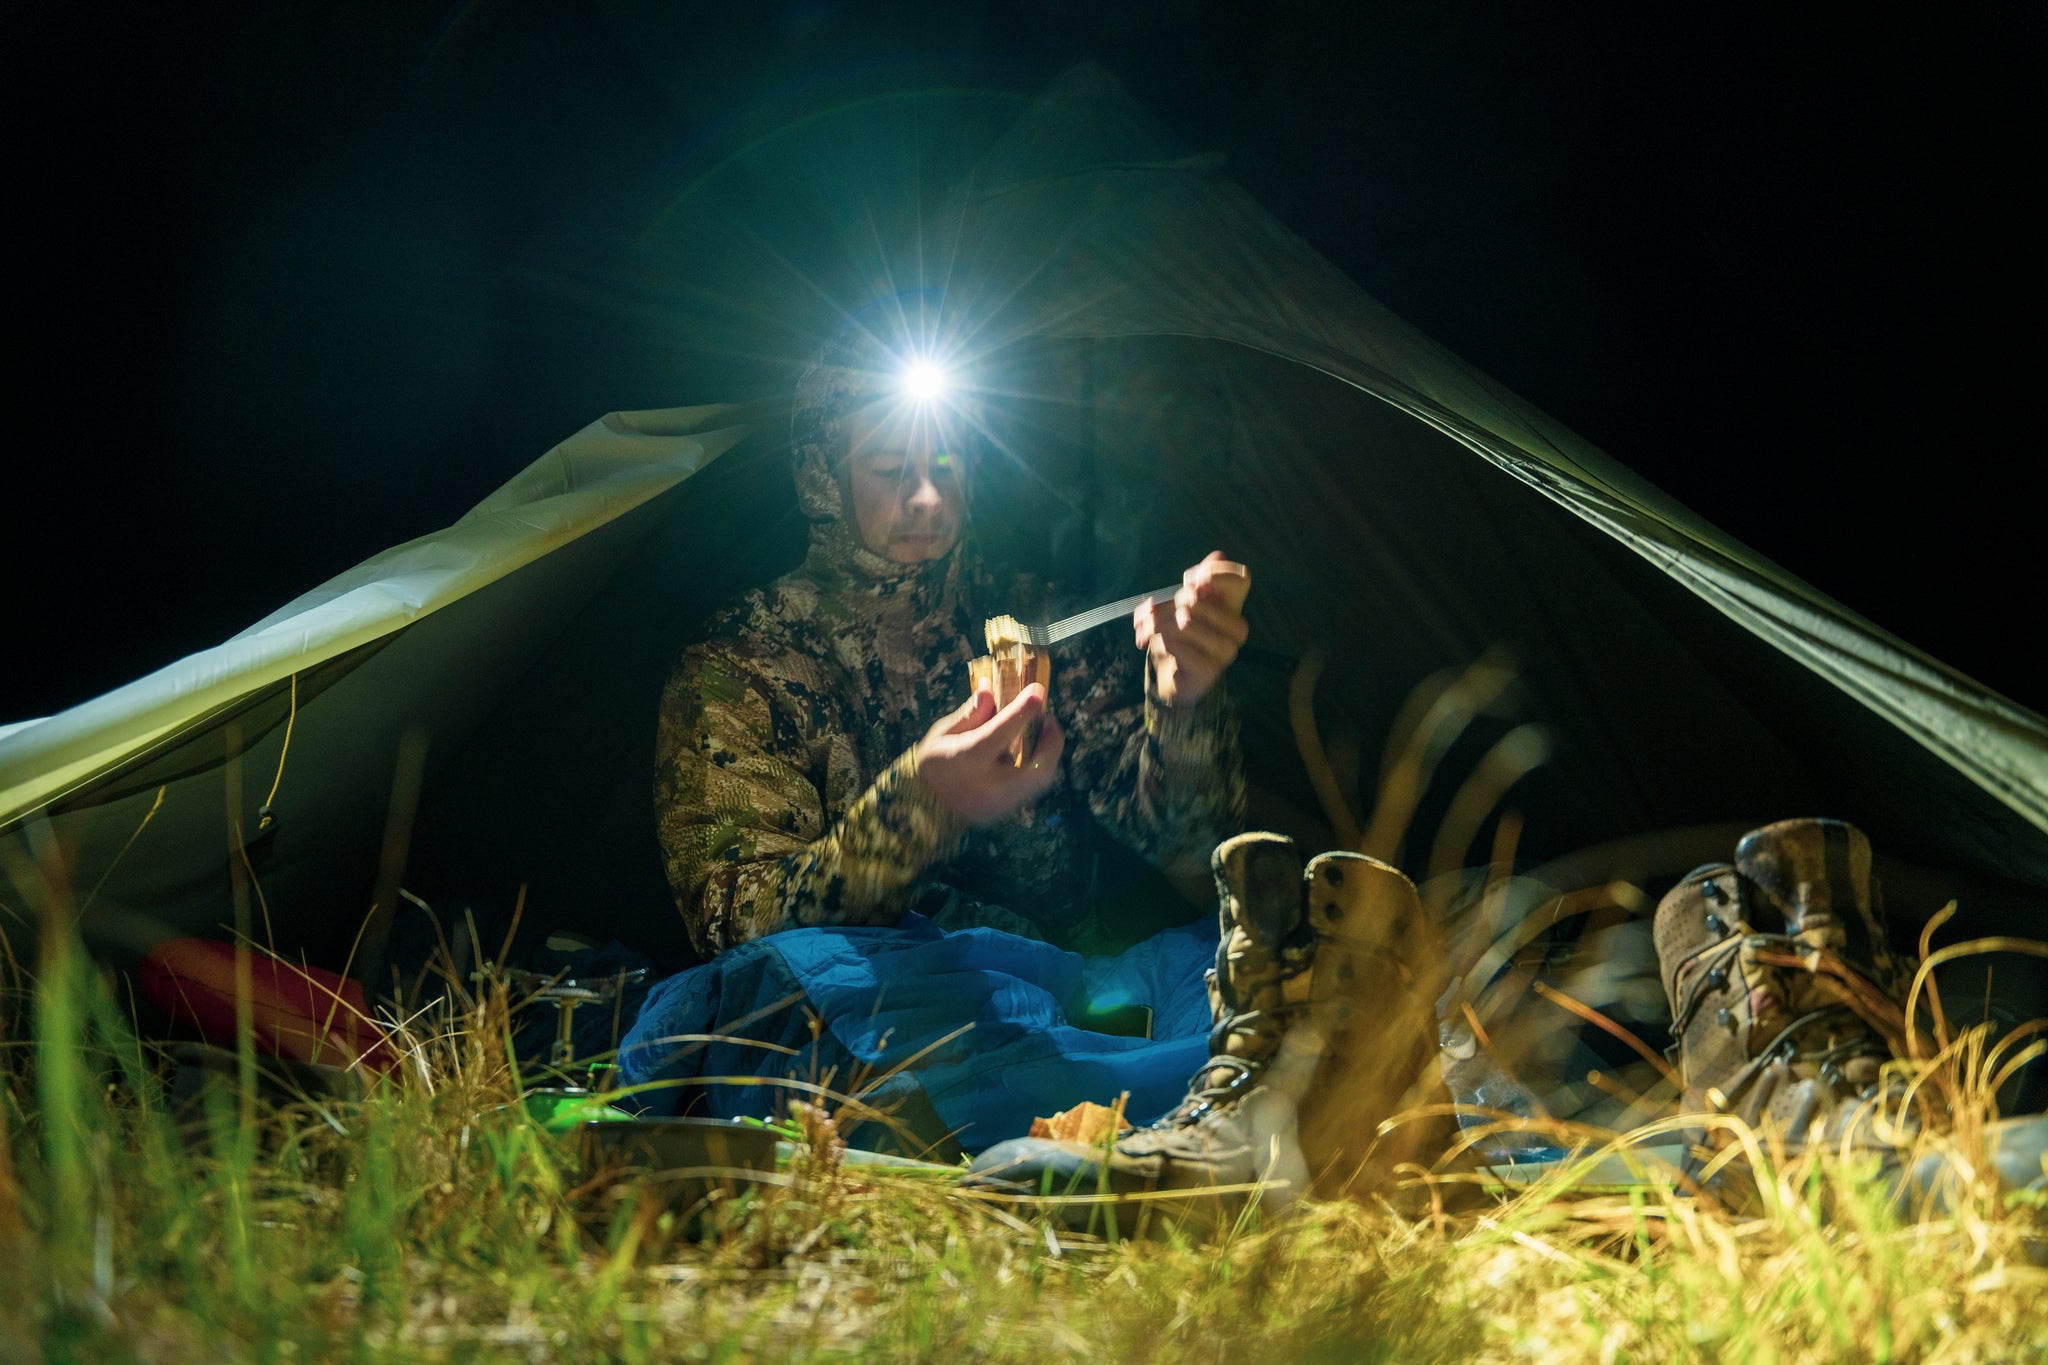 NUTRITION FOR BACKCOUNTRY HUNTING